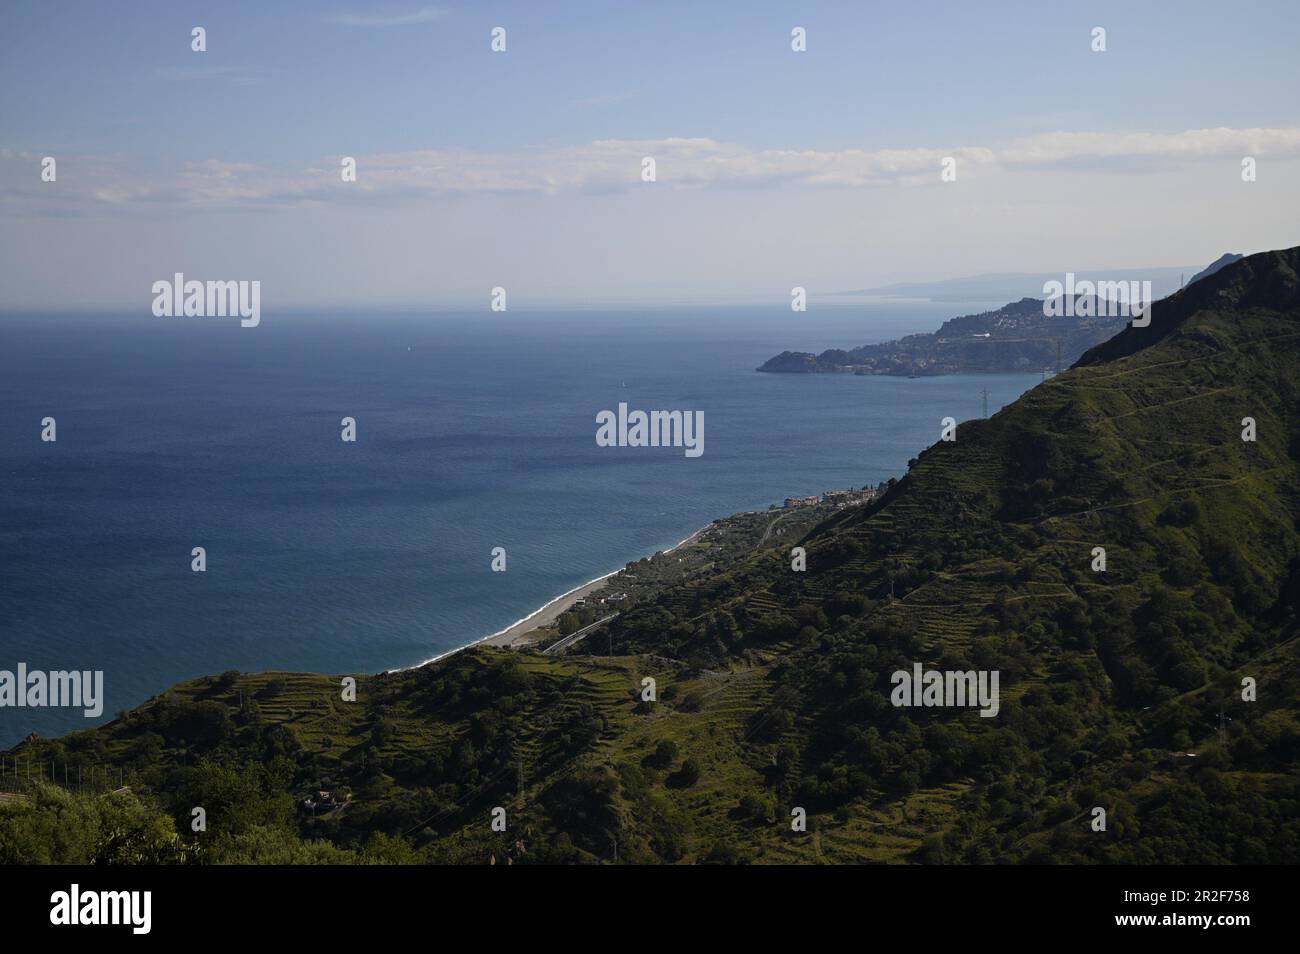 Landscape with scenic view of Spiaggia di Forza d'Agrò a sandy beach between Taormina and Letojanni in Sicily, Italy. Stock Photo